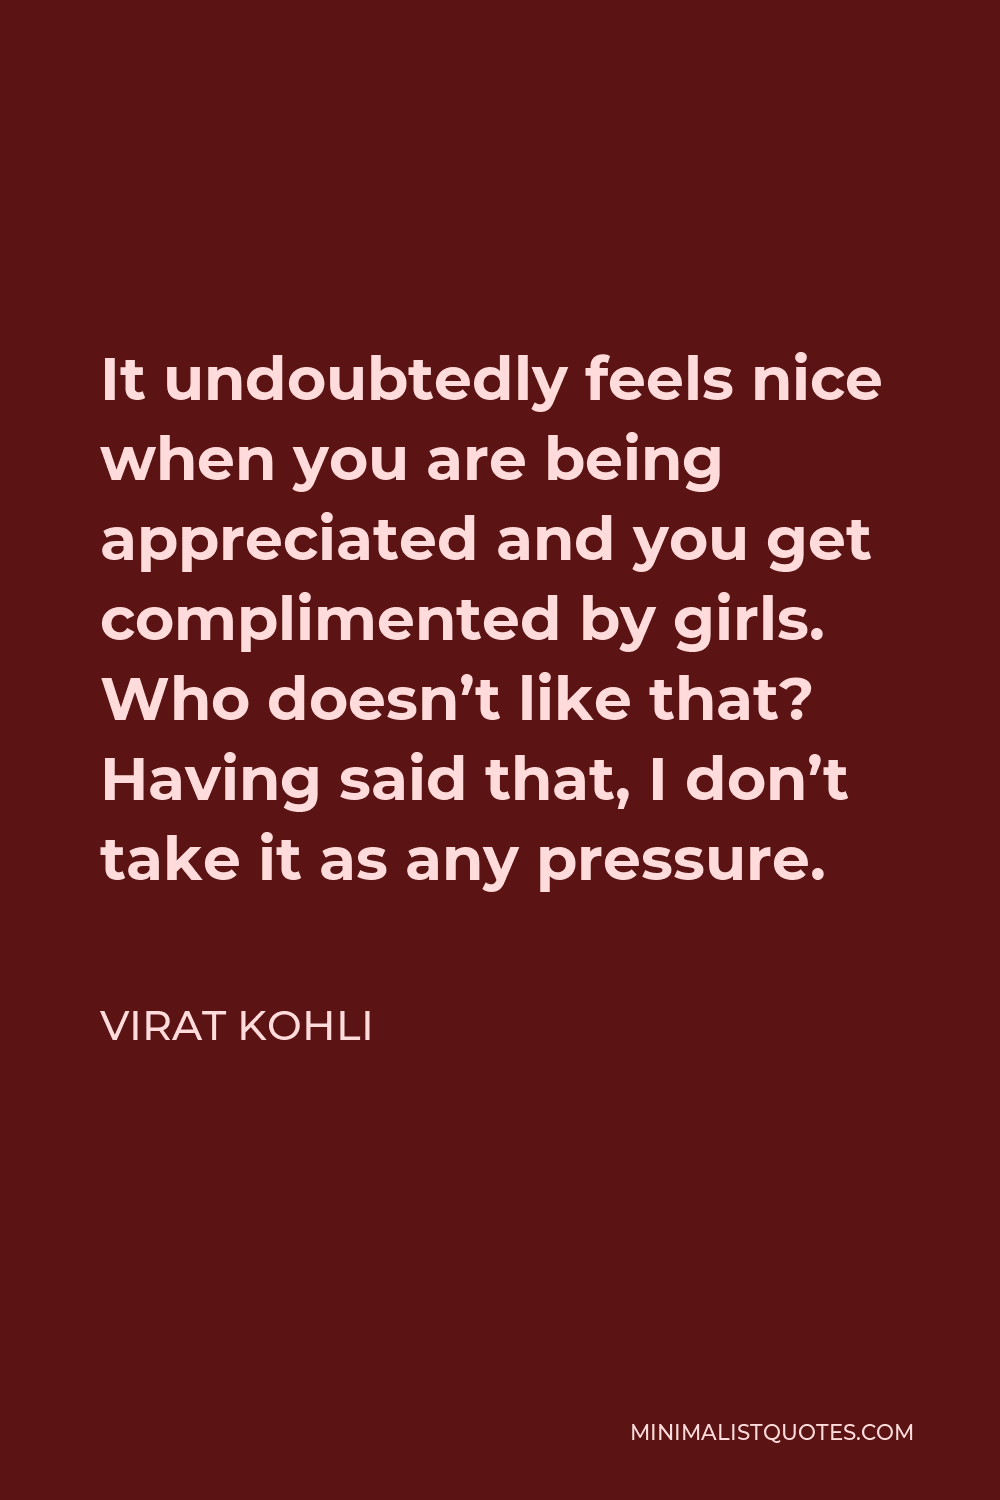 Virat Kohli Quote - It undoubtedly feels nice when you are being appreciated and you get complimented by girls. Who doesn’t like that? Having said that, I don’t take it as any pressure.